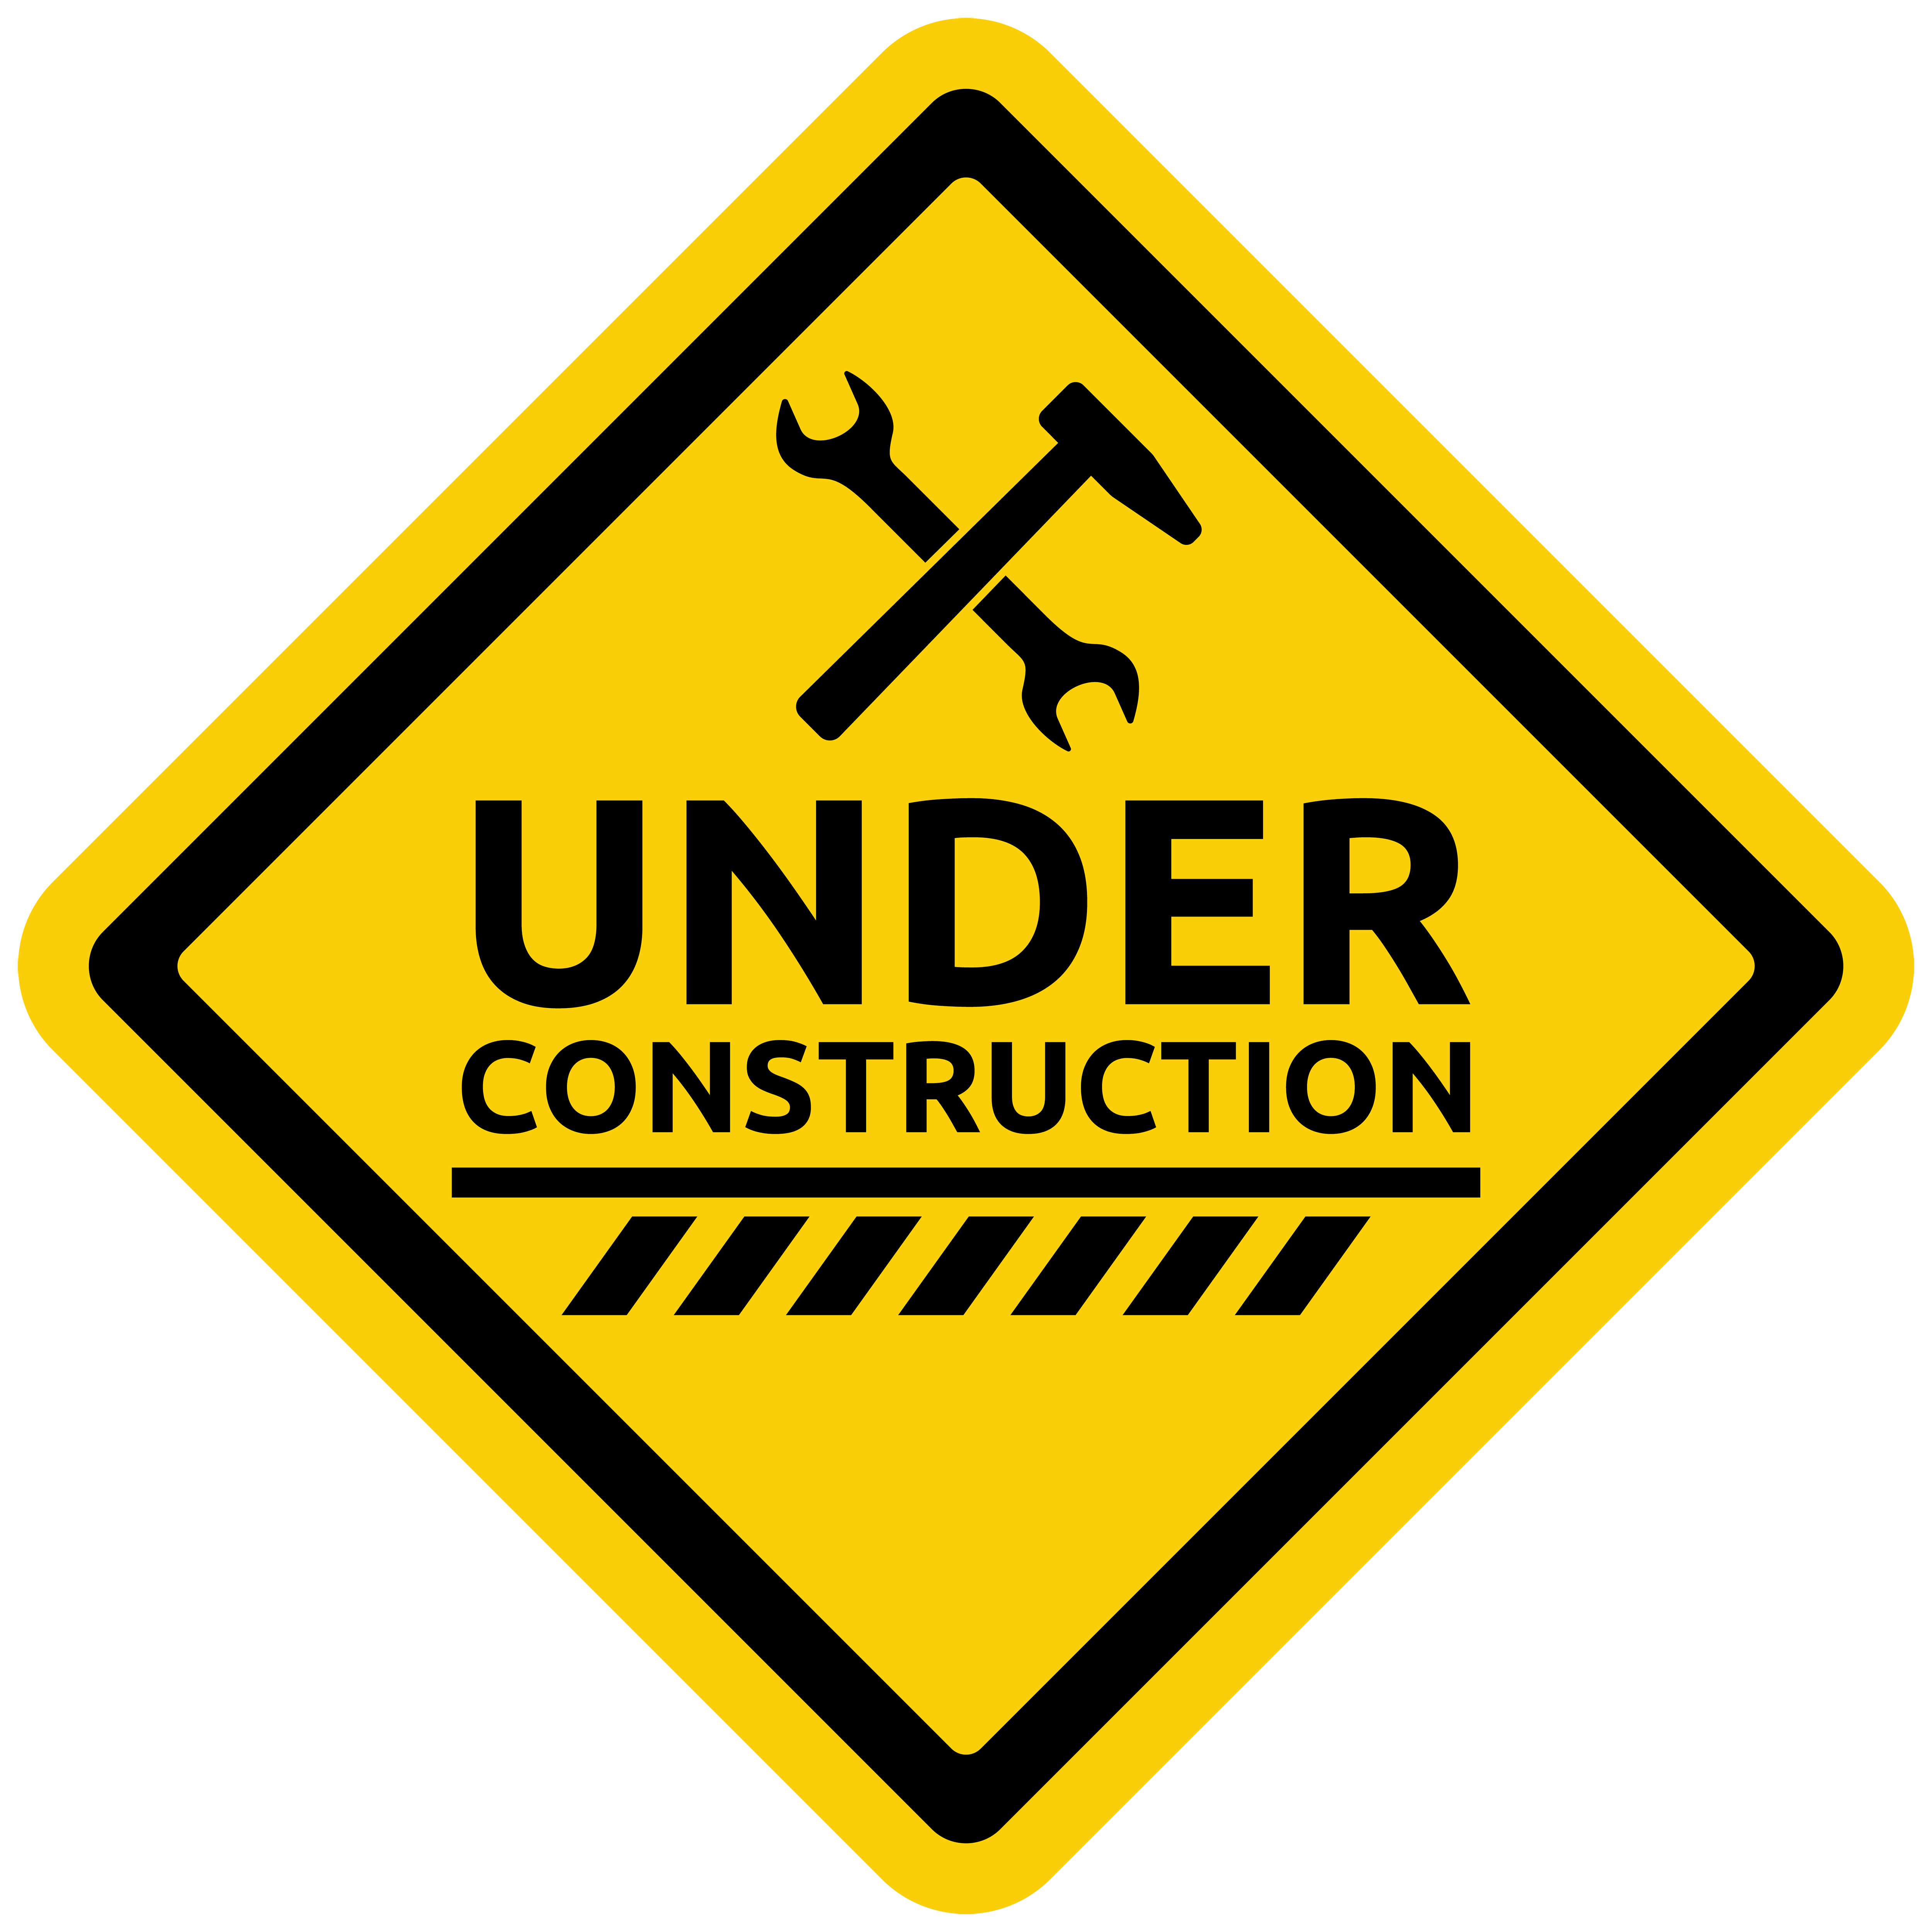 Under construction! Meanwhile...